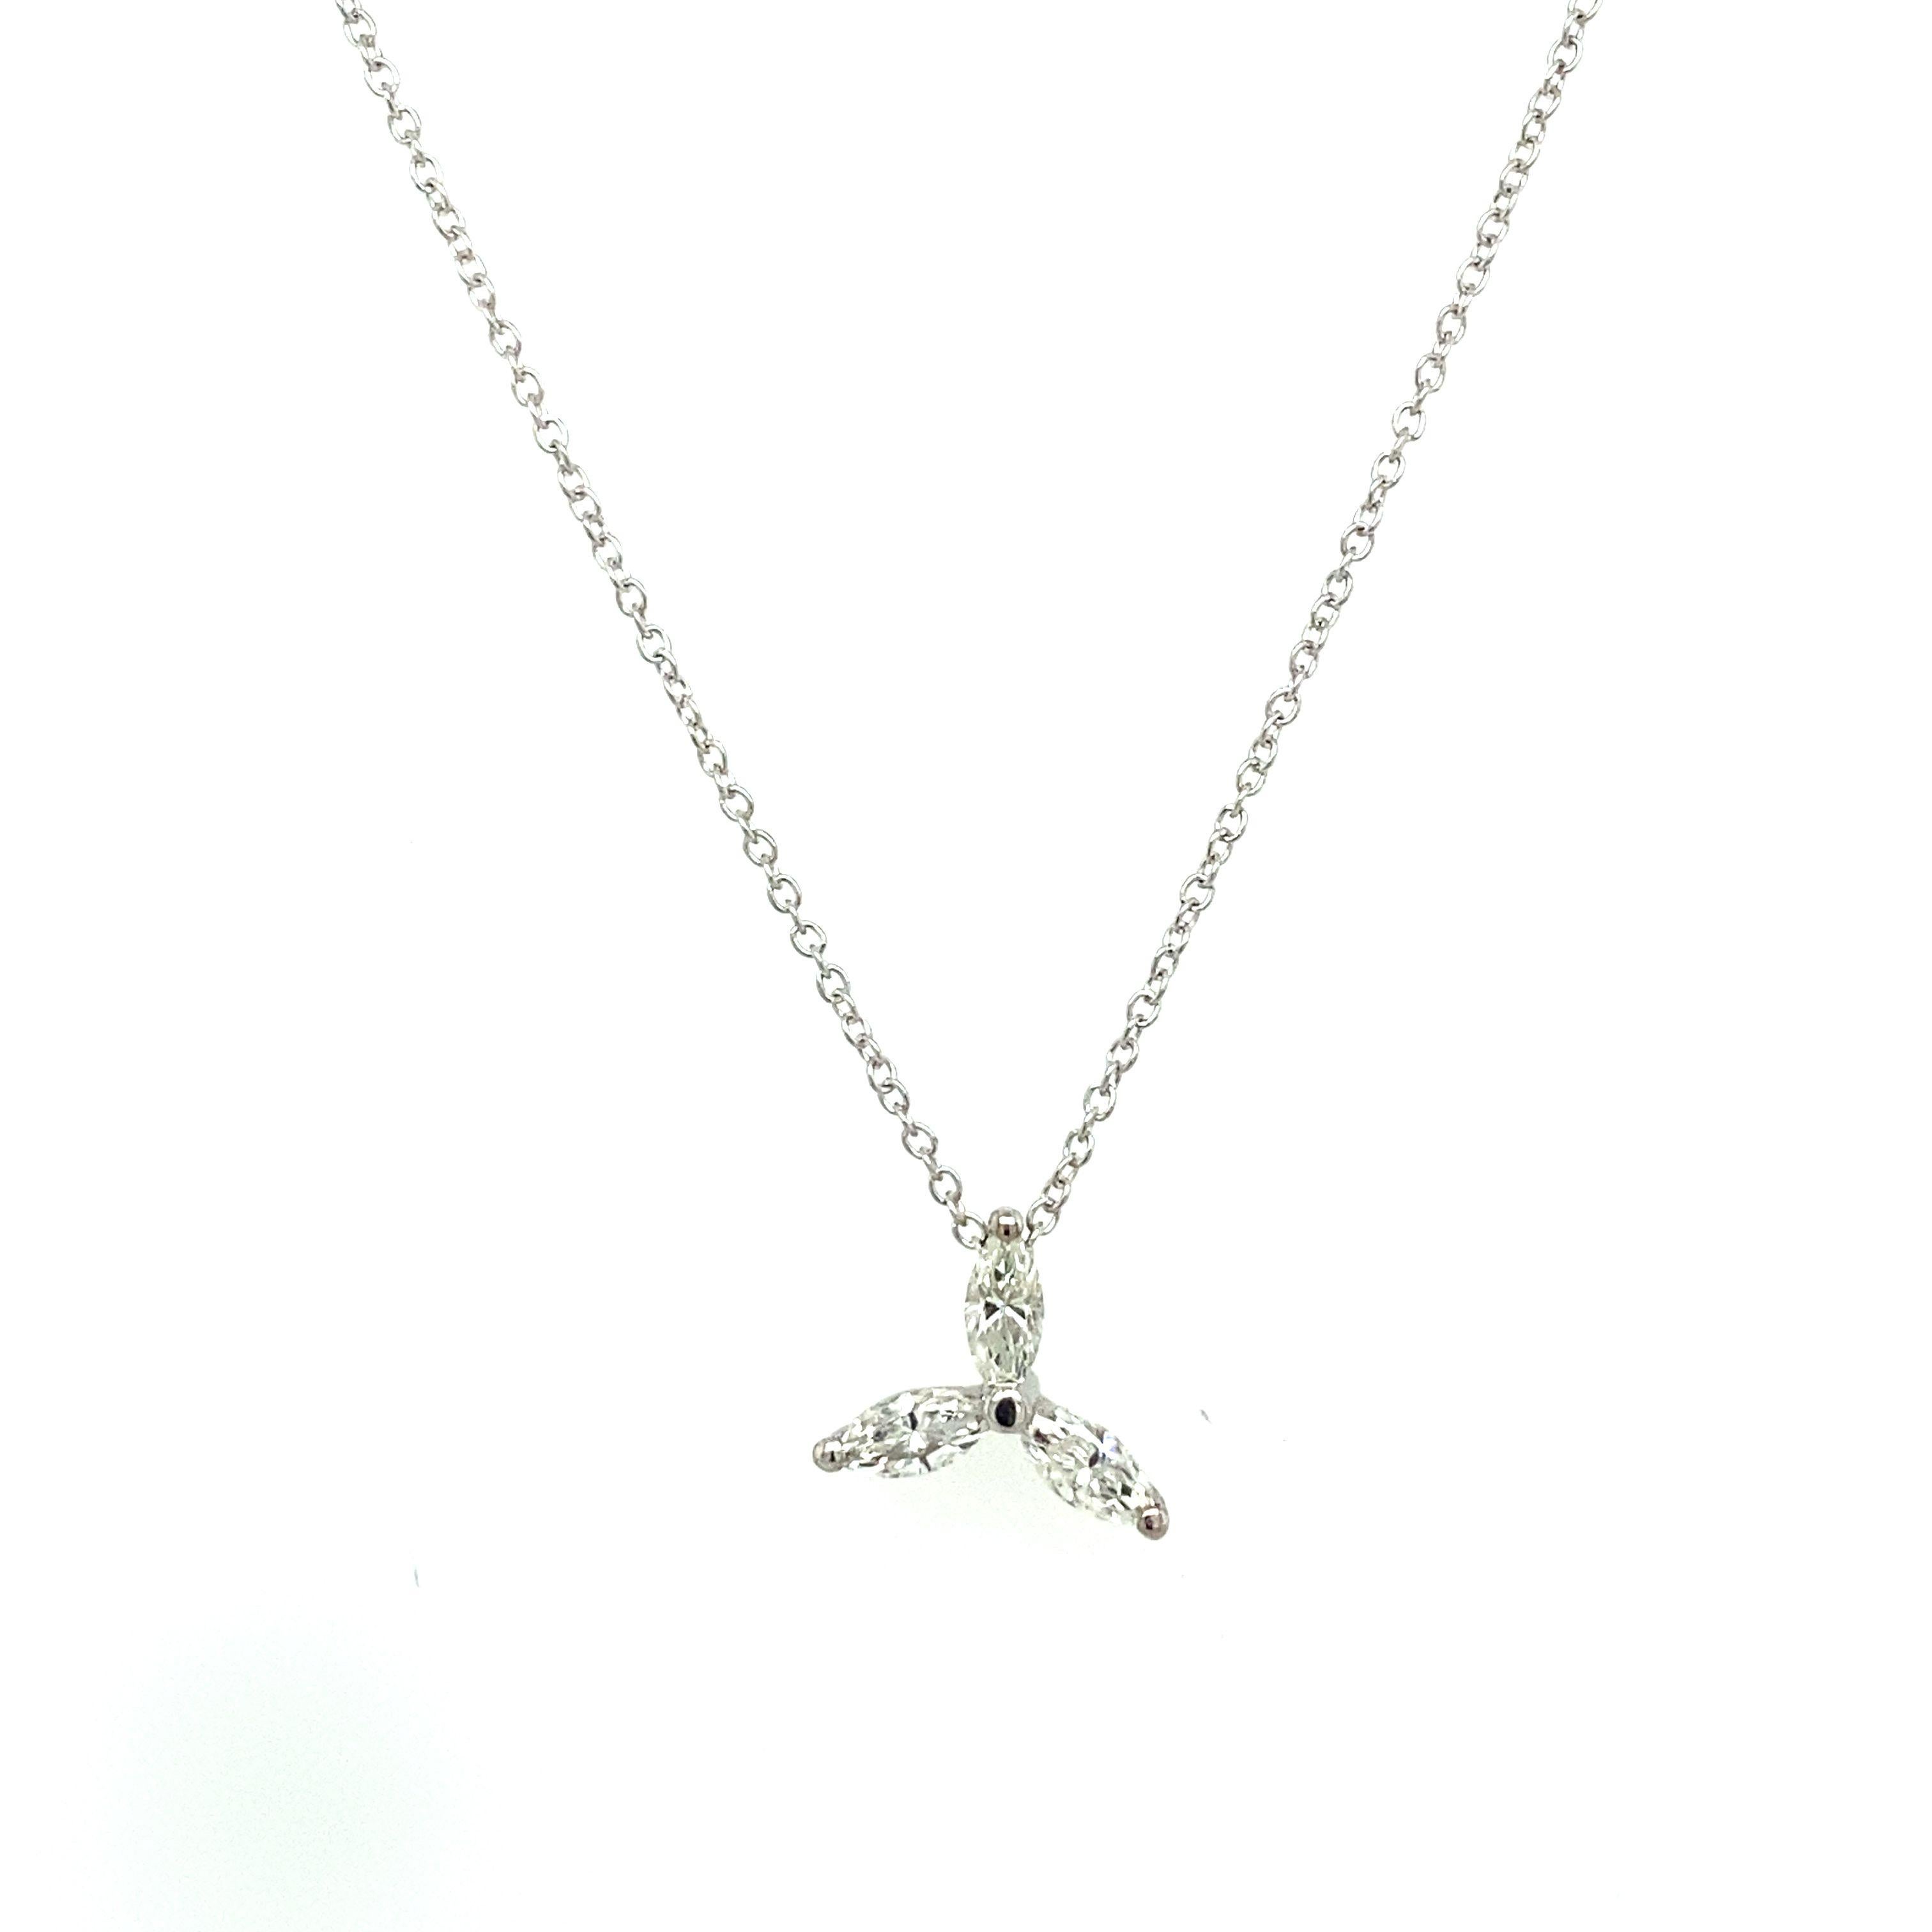 New 3-Stone Marquise Diamond Pendant Set in 18ct White Gold

Additional Information:
On A 16